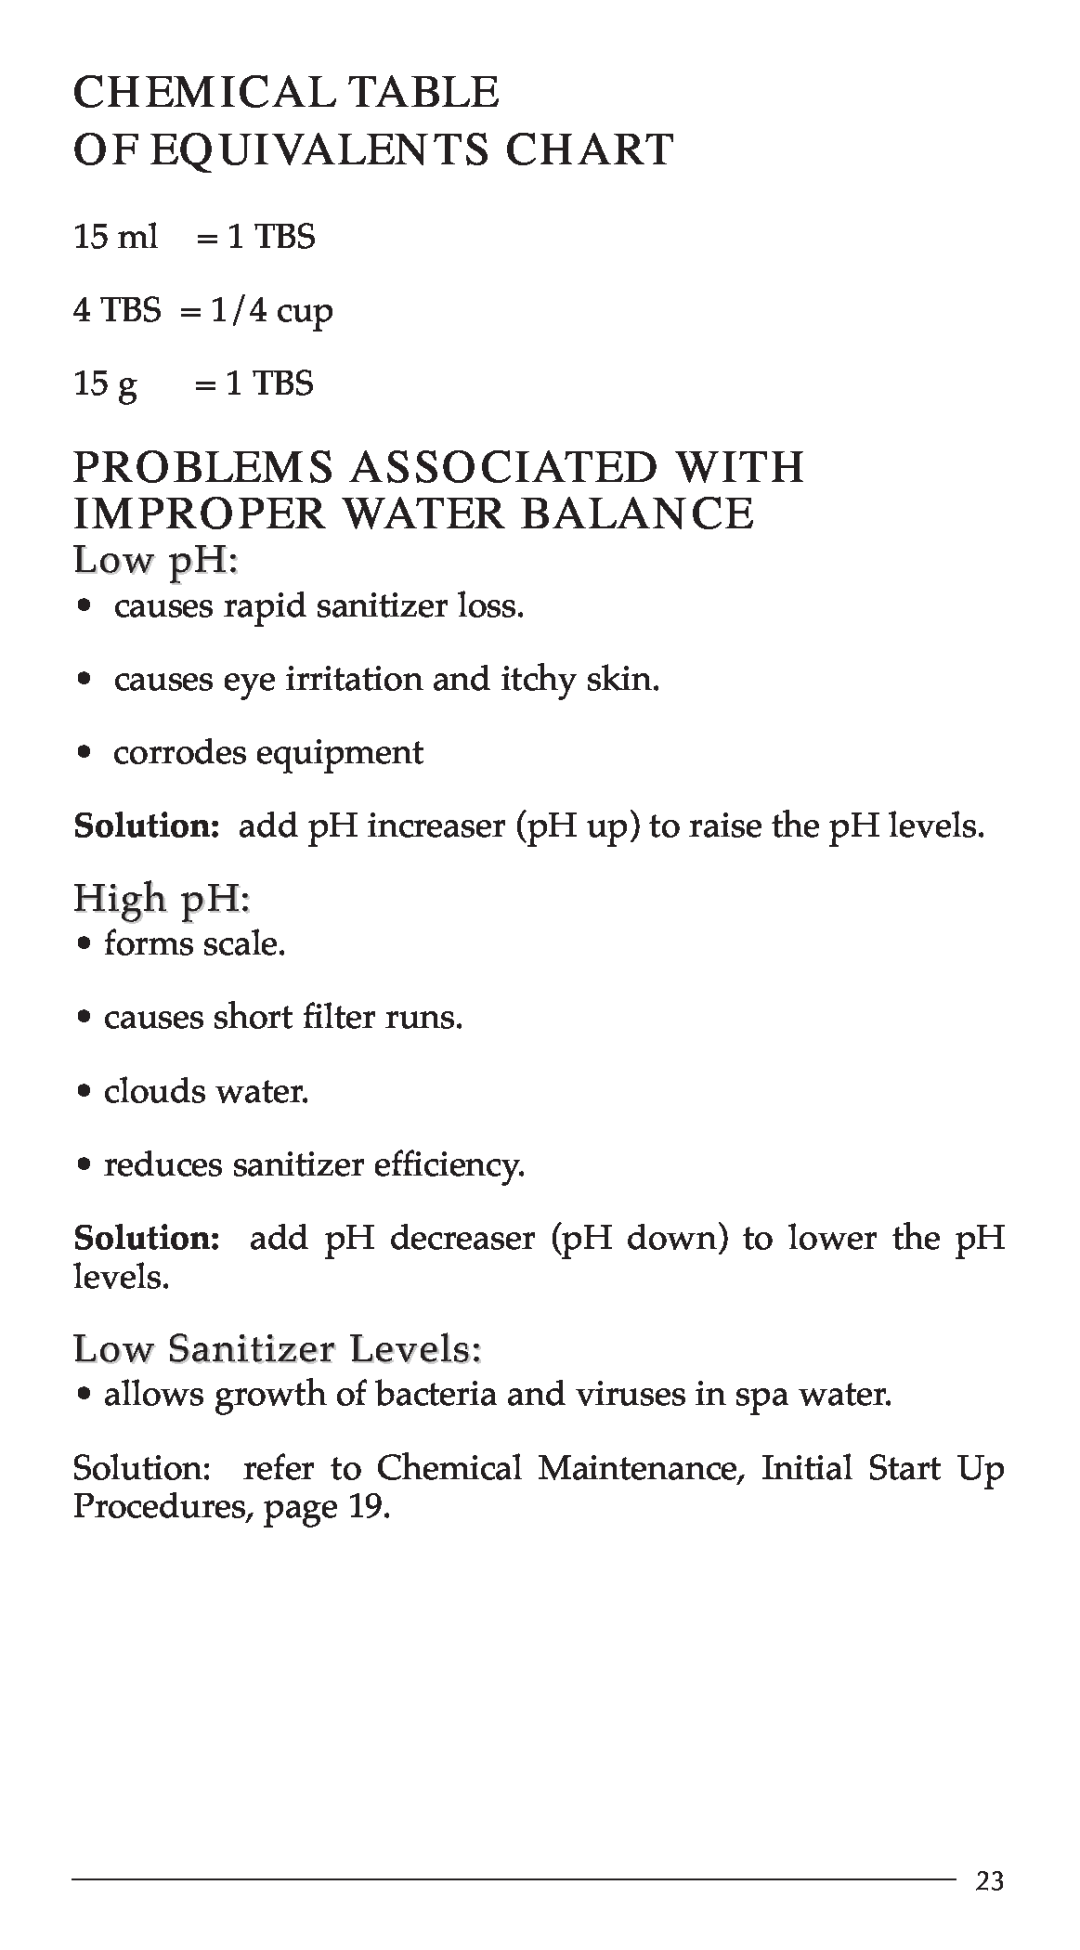 Aruba Spa 2003 Breeze manual Chemical Table Of Equivalents Chart, Problems Associated With Improper Water Balance, Low pH 